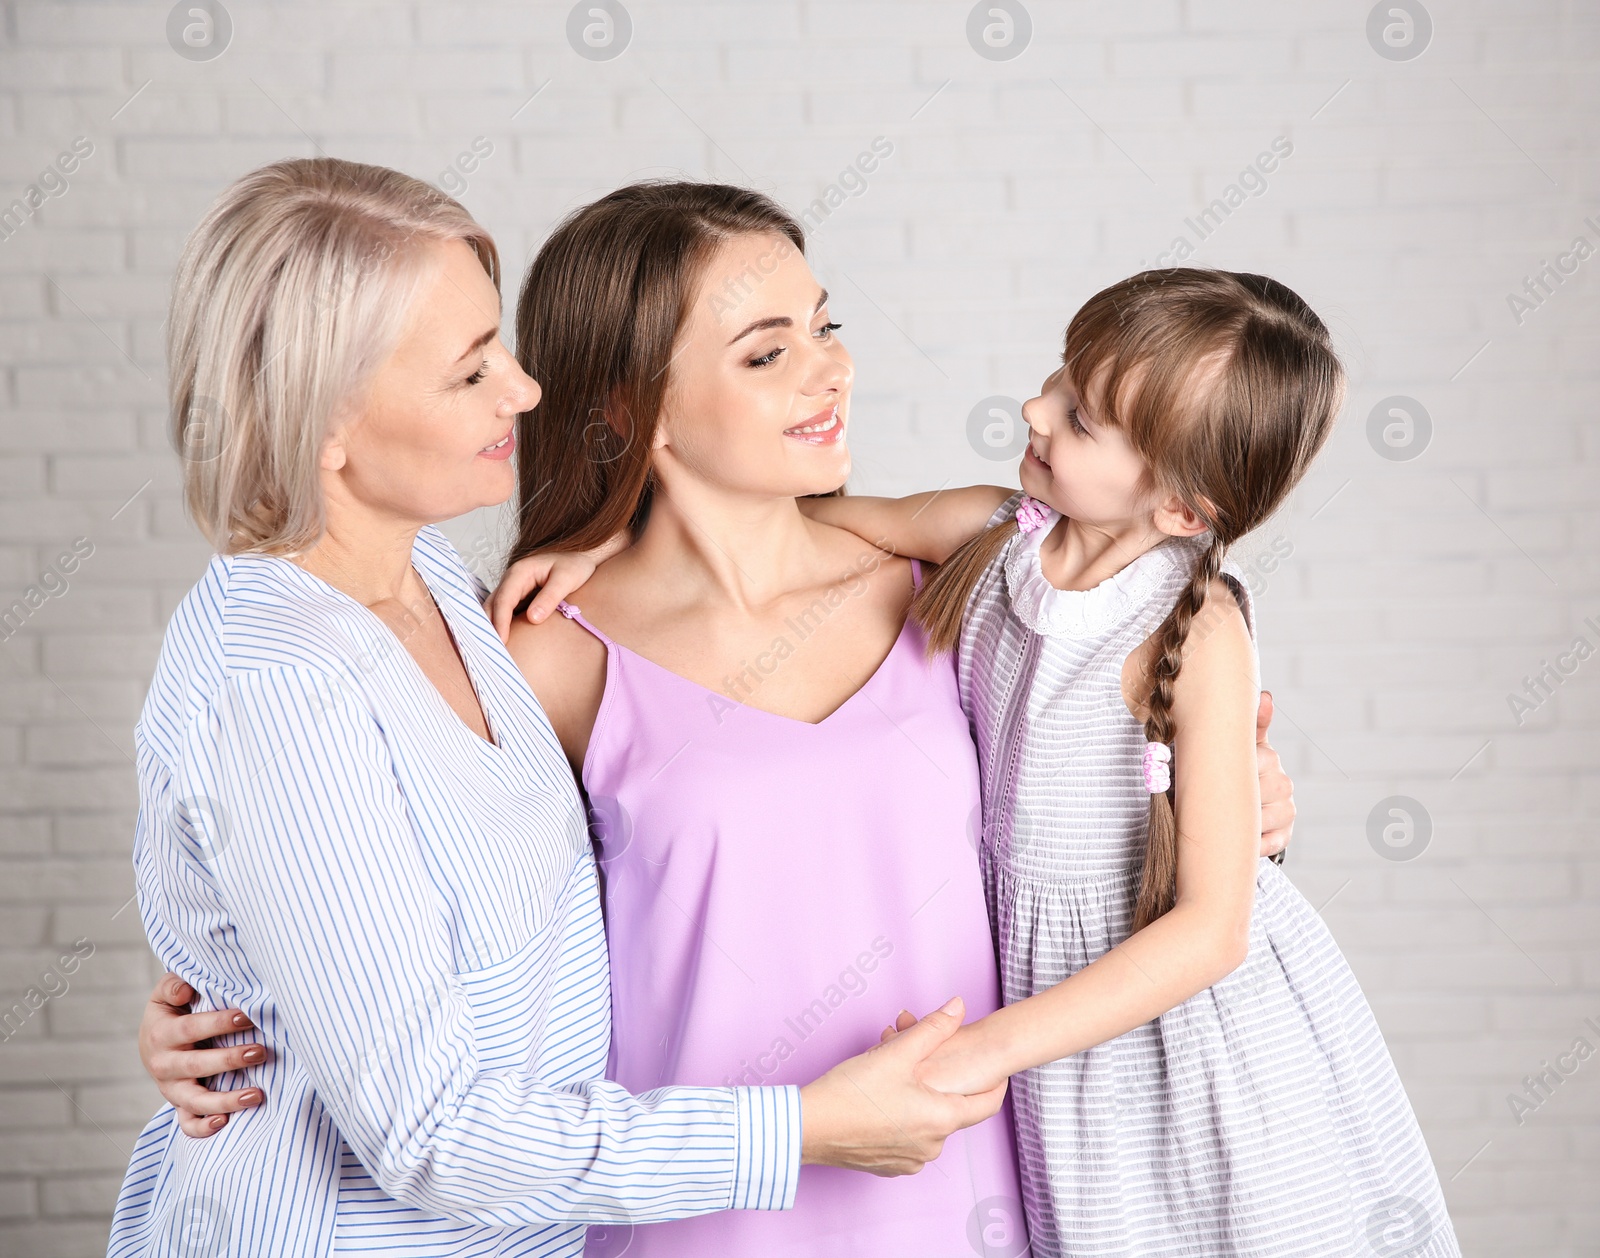 Photo of Beautiful mature woman with daughter and grandchild near brick wall